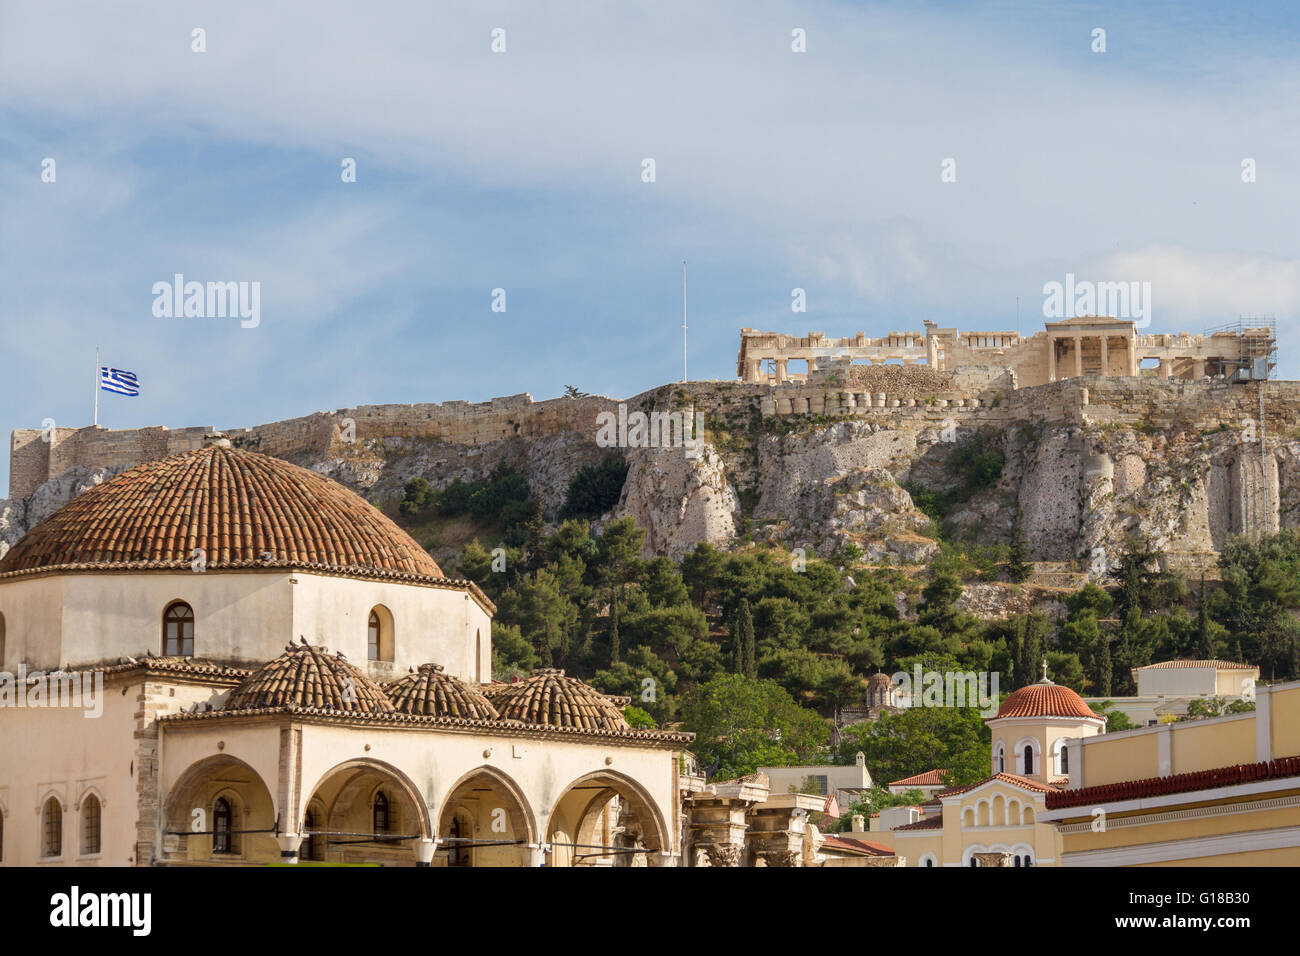 View of the Acropolis monument from Monastiraki Square. Afternoon photo in April 2016 Stock Photo